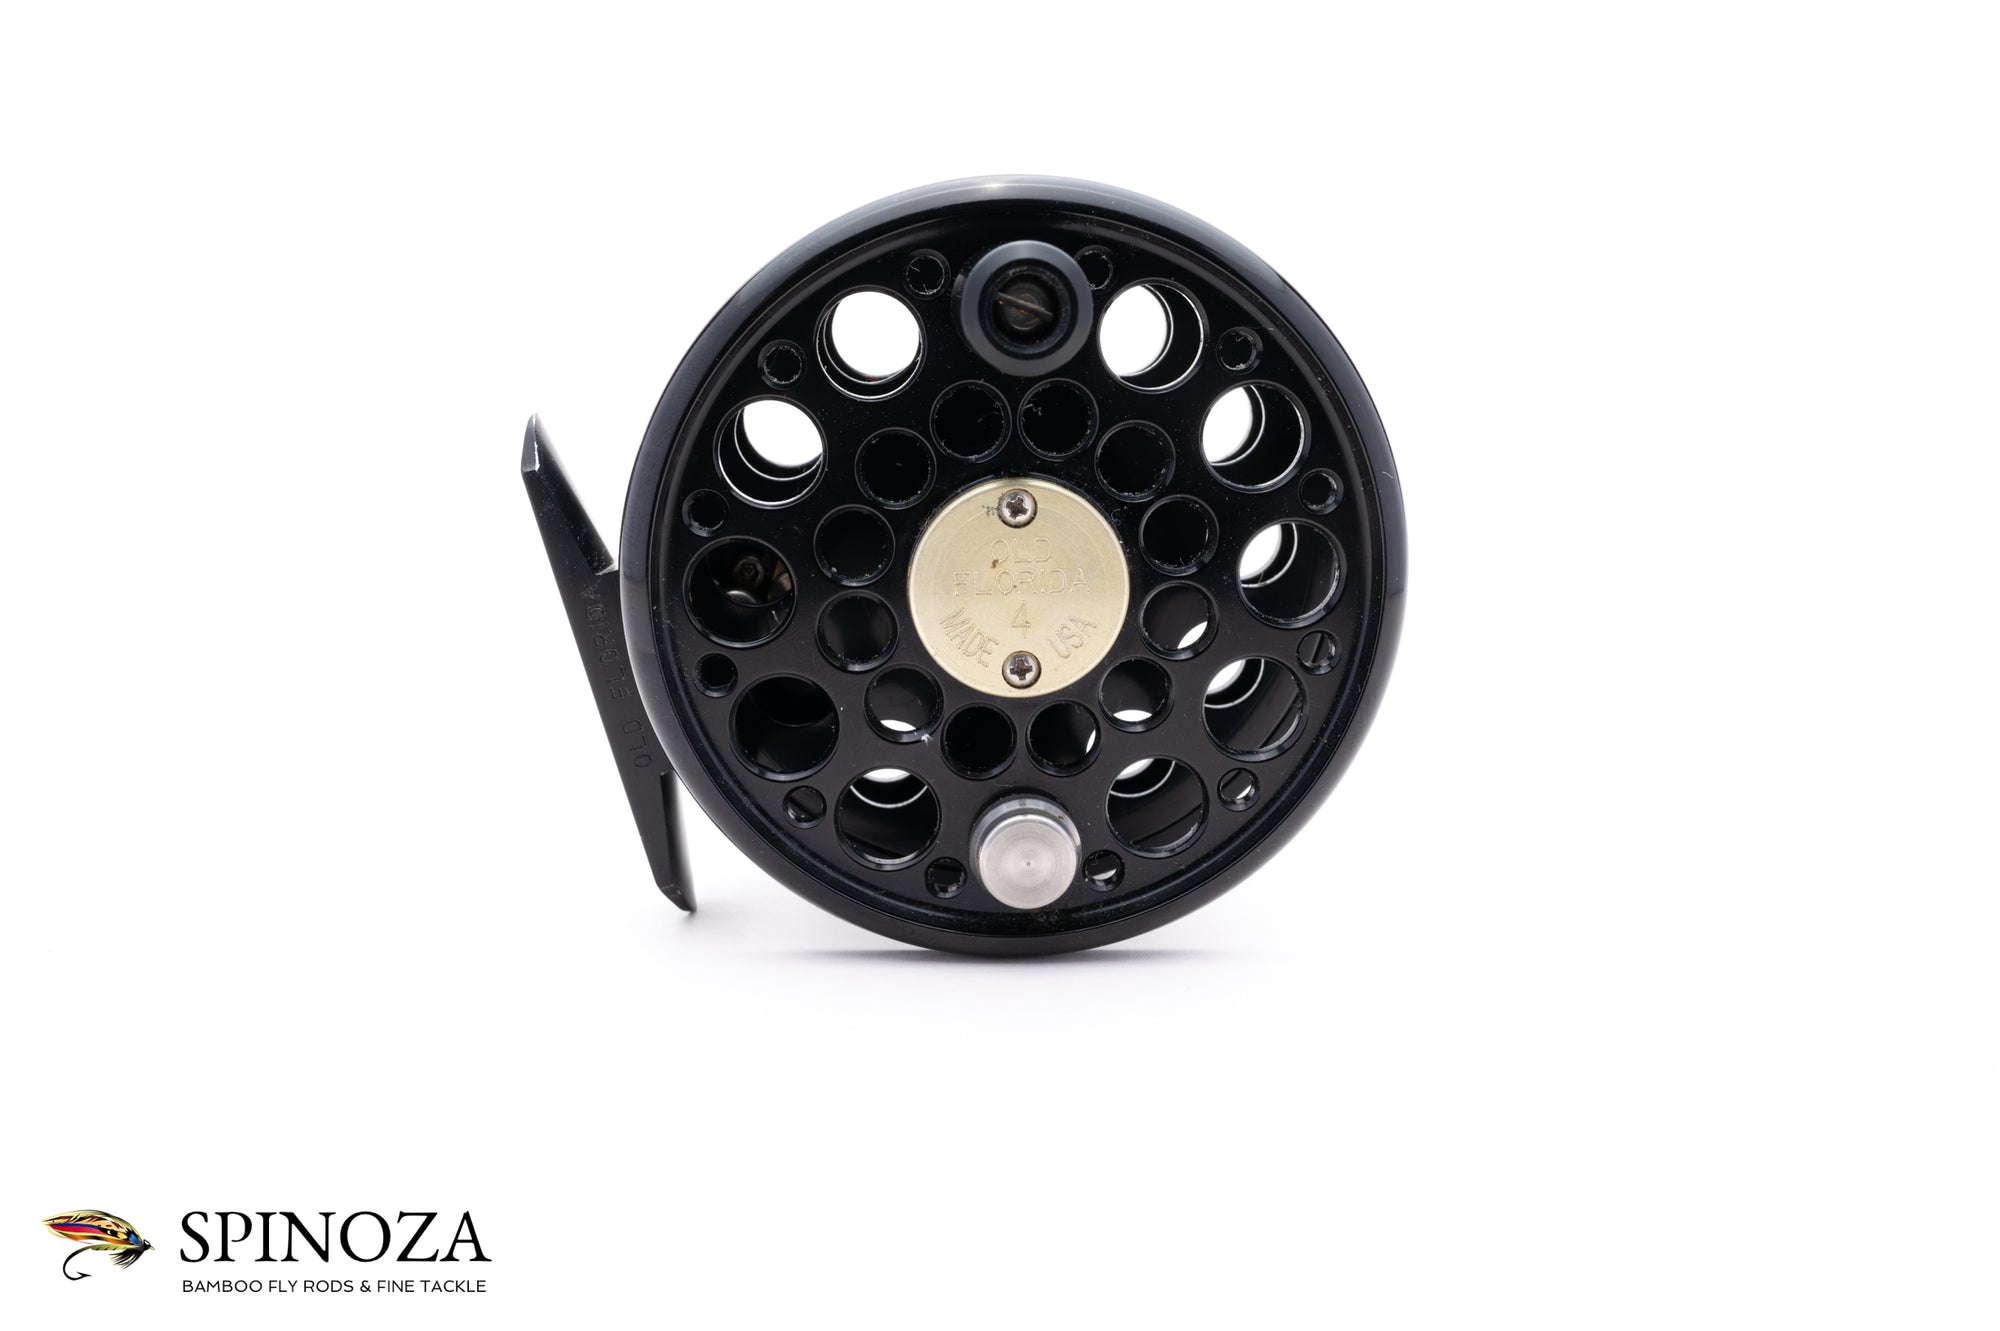 Lamson LP 3 fly reel and two spare spools - Spinoza Rod Company